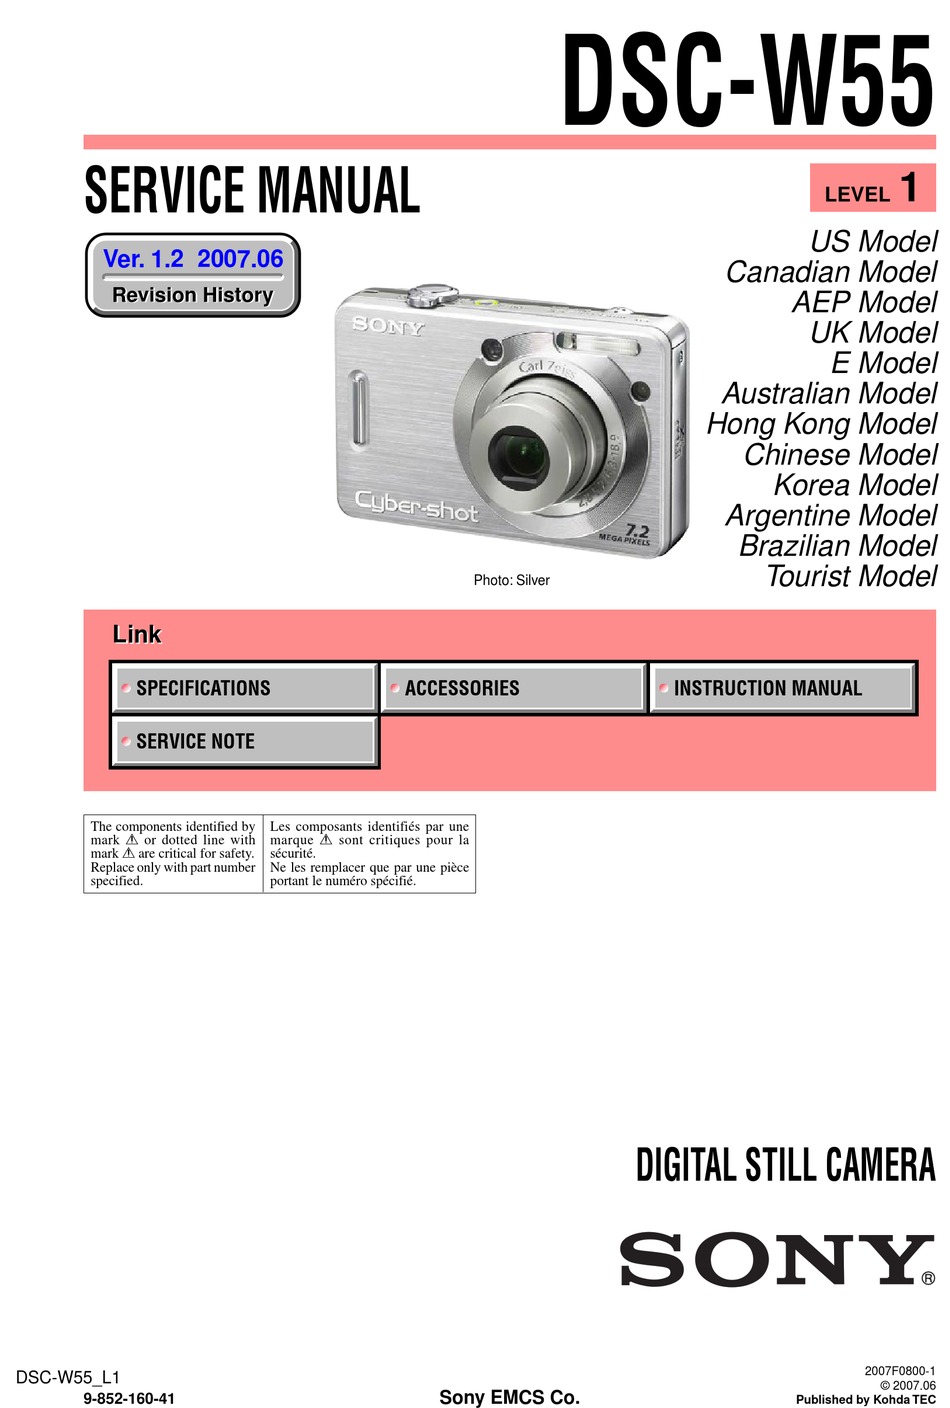 Camerarace  Sony Cyber-shot DSC-W570 - Review and technical sheet